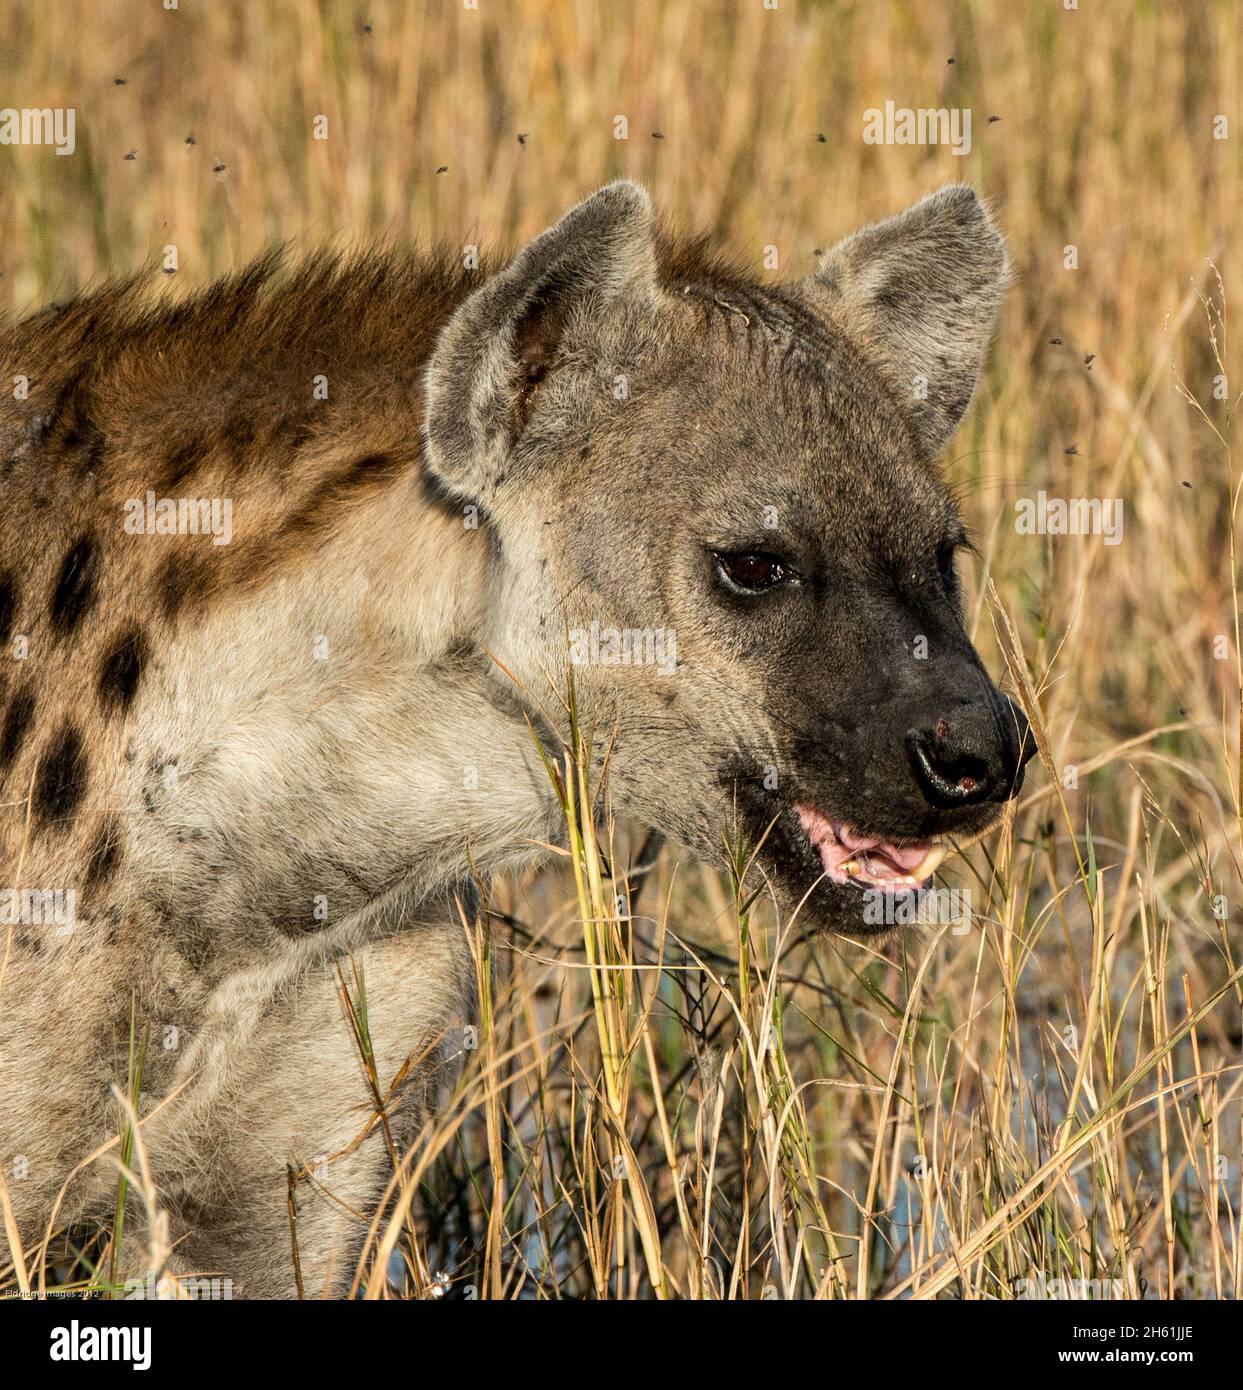 Spotted Hygena (Laughing Hygena) as seen close up on an African Safari Stock Photo